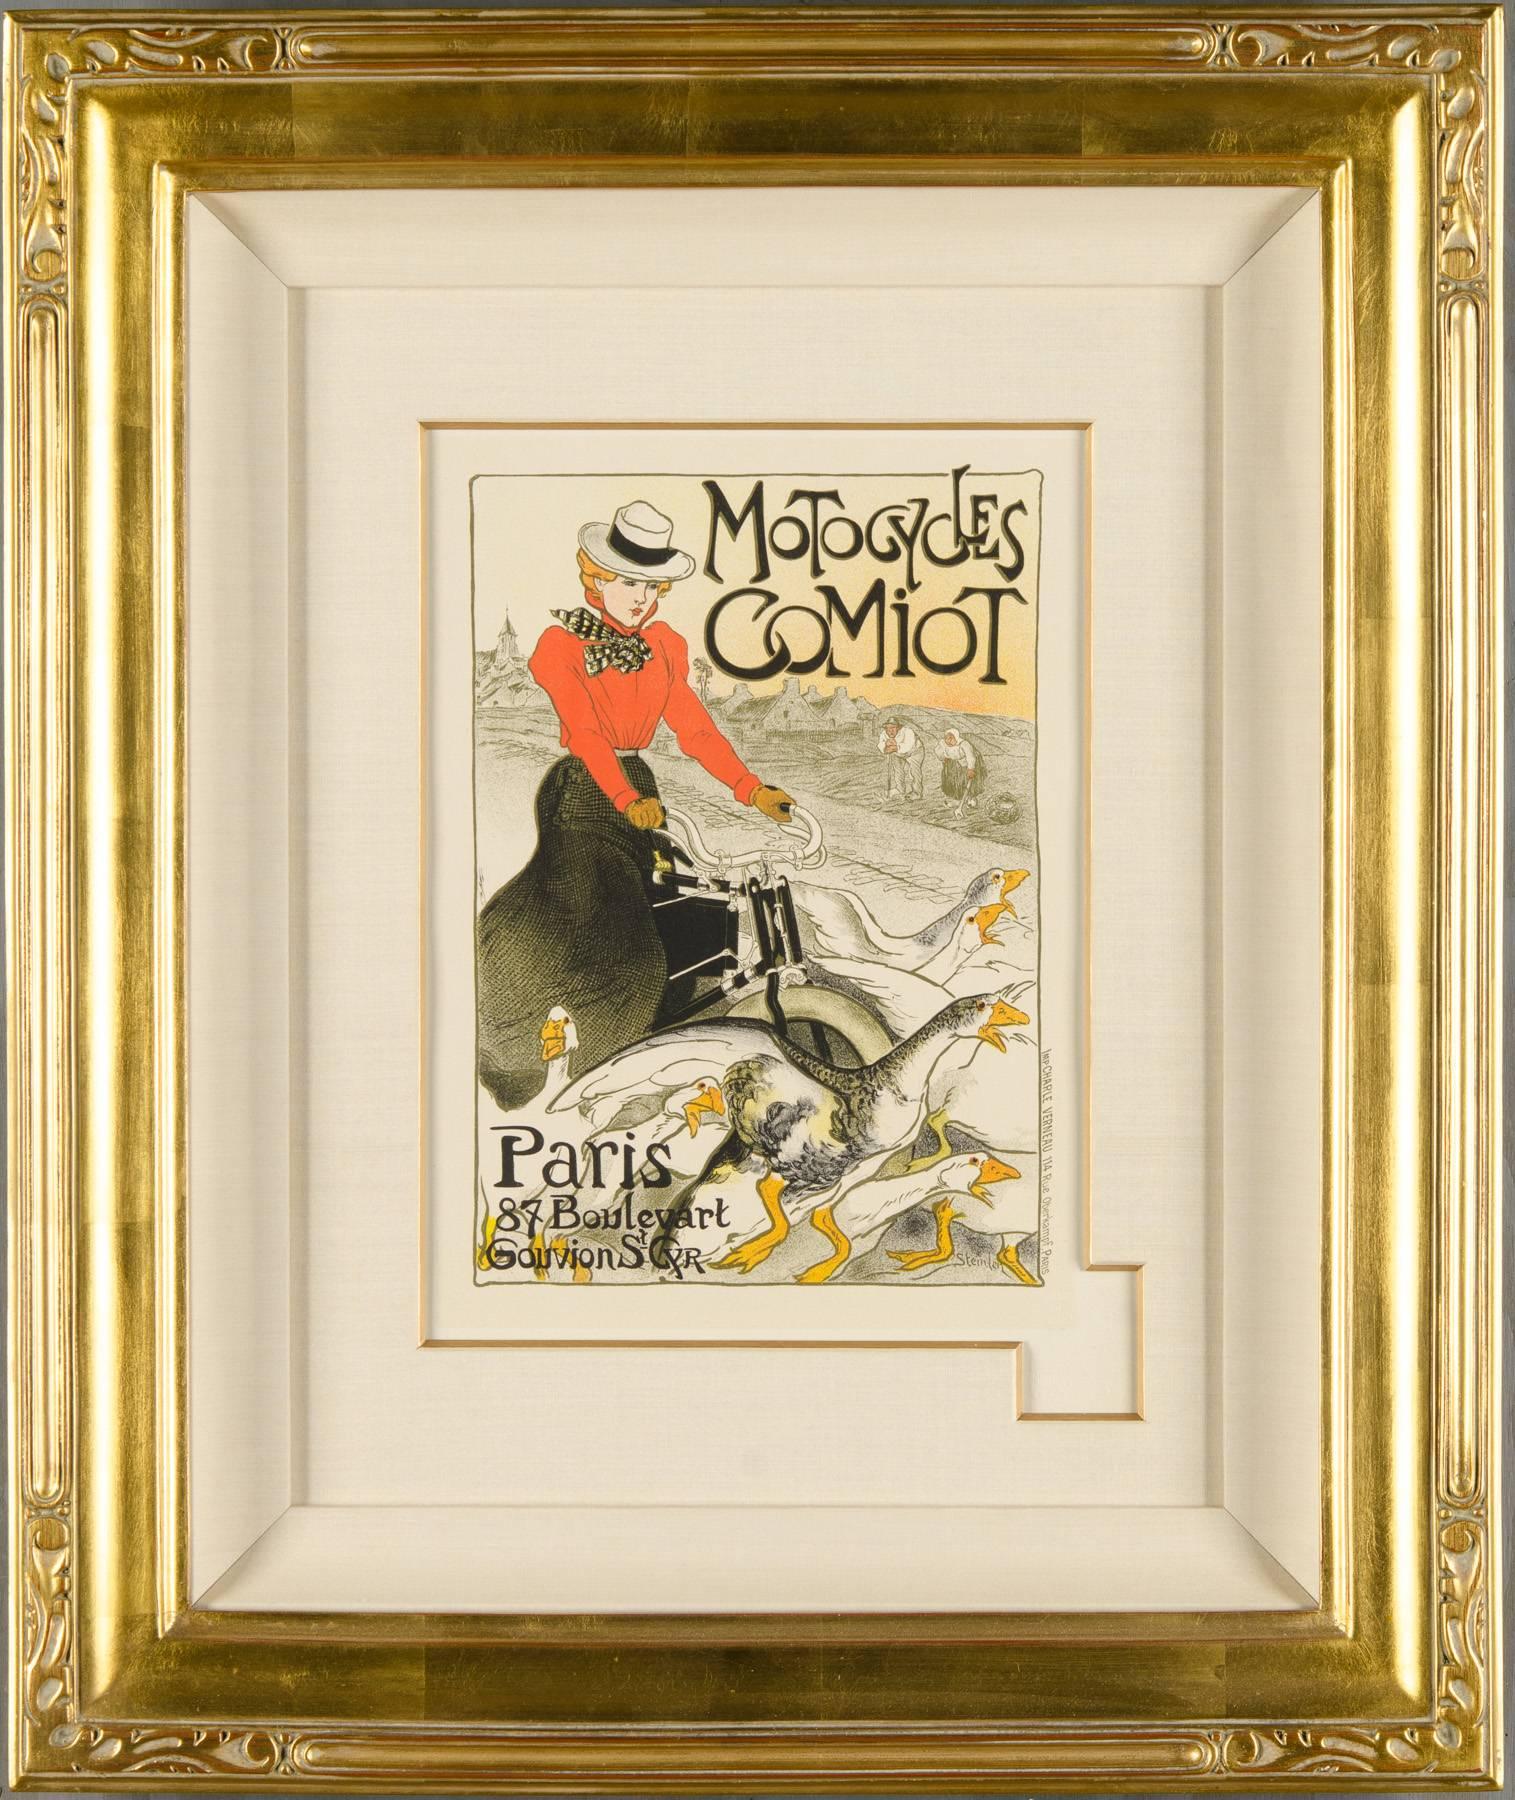 Motocycles Comiot - Print by Théophile Alexandre Steinlen